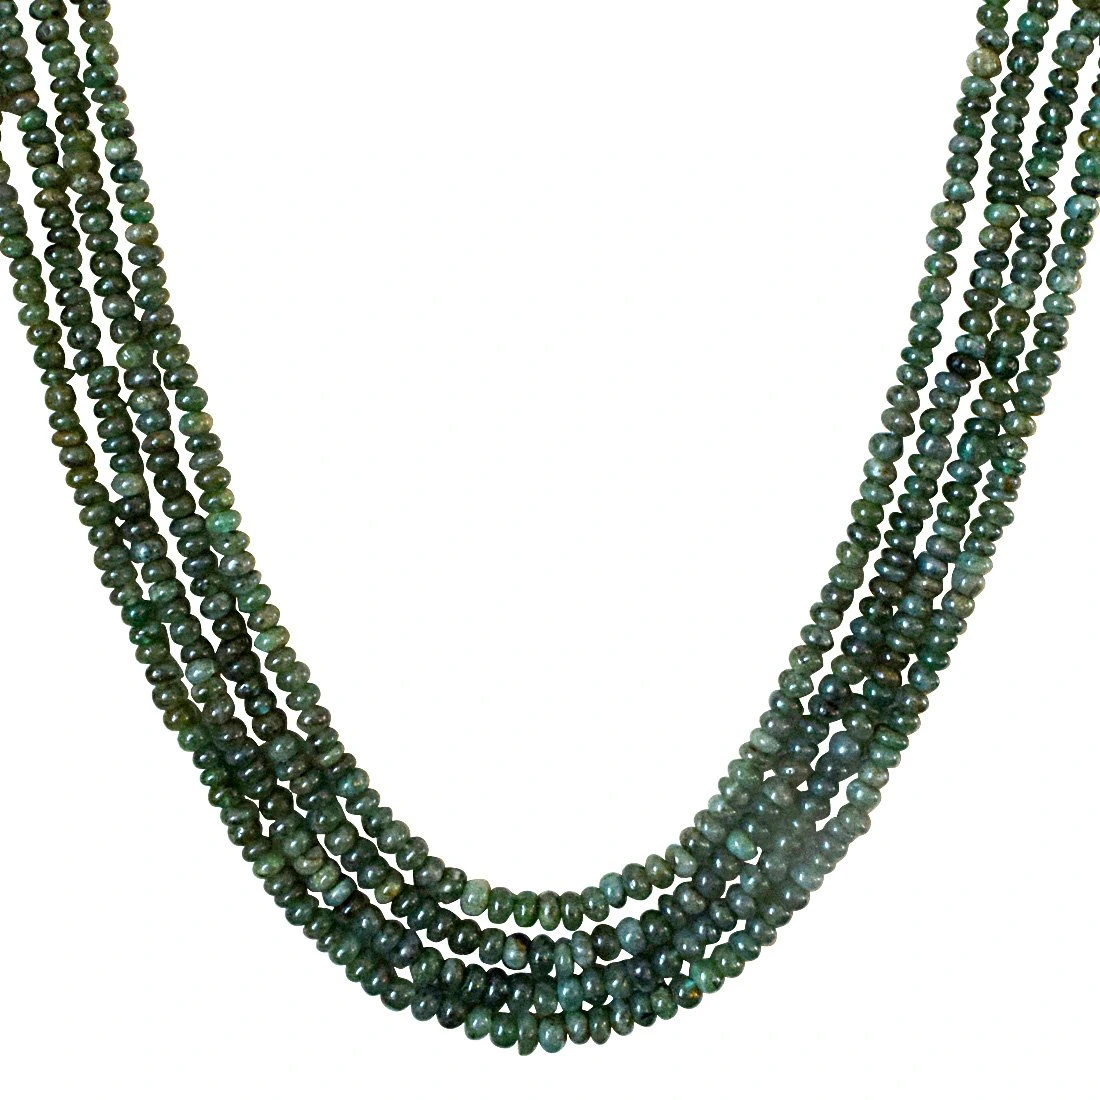 4 Line 176cts REAL Natural Green Emerald Beads Necklace for Women (176cts EMR Neck)